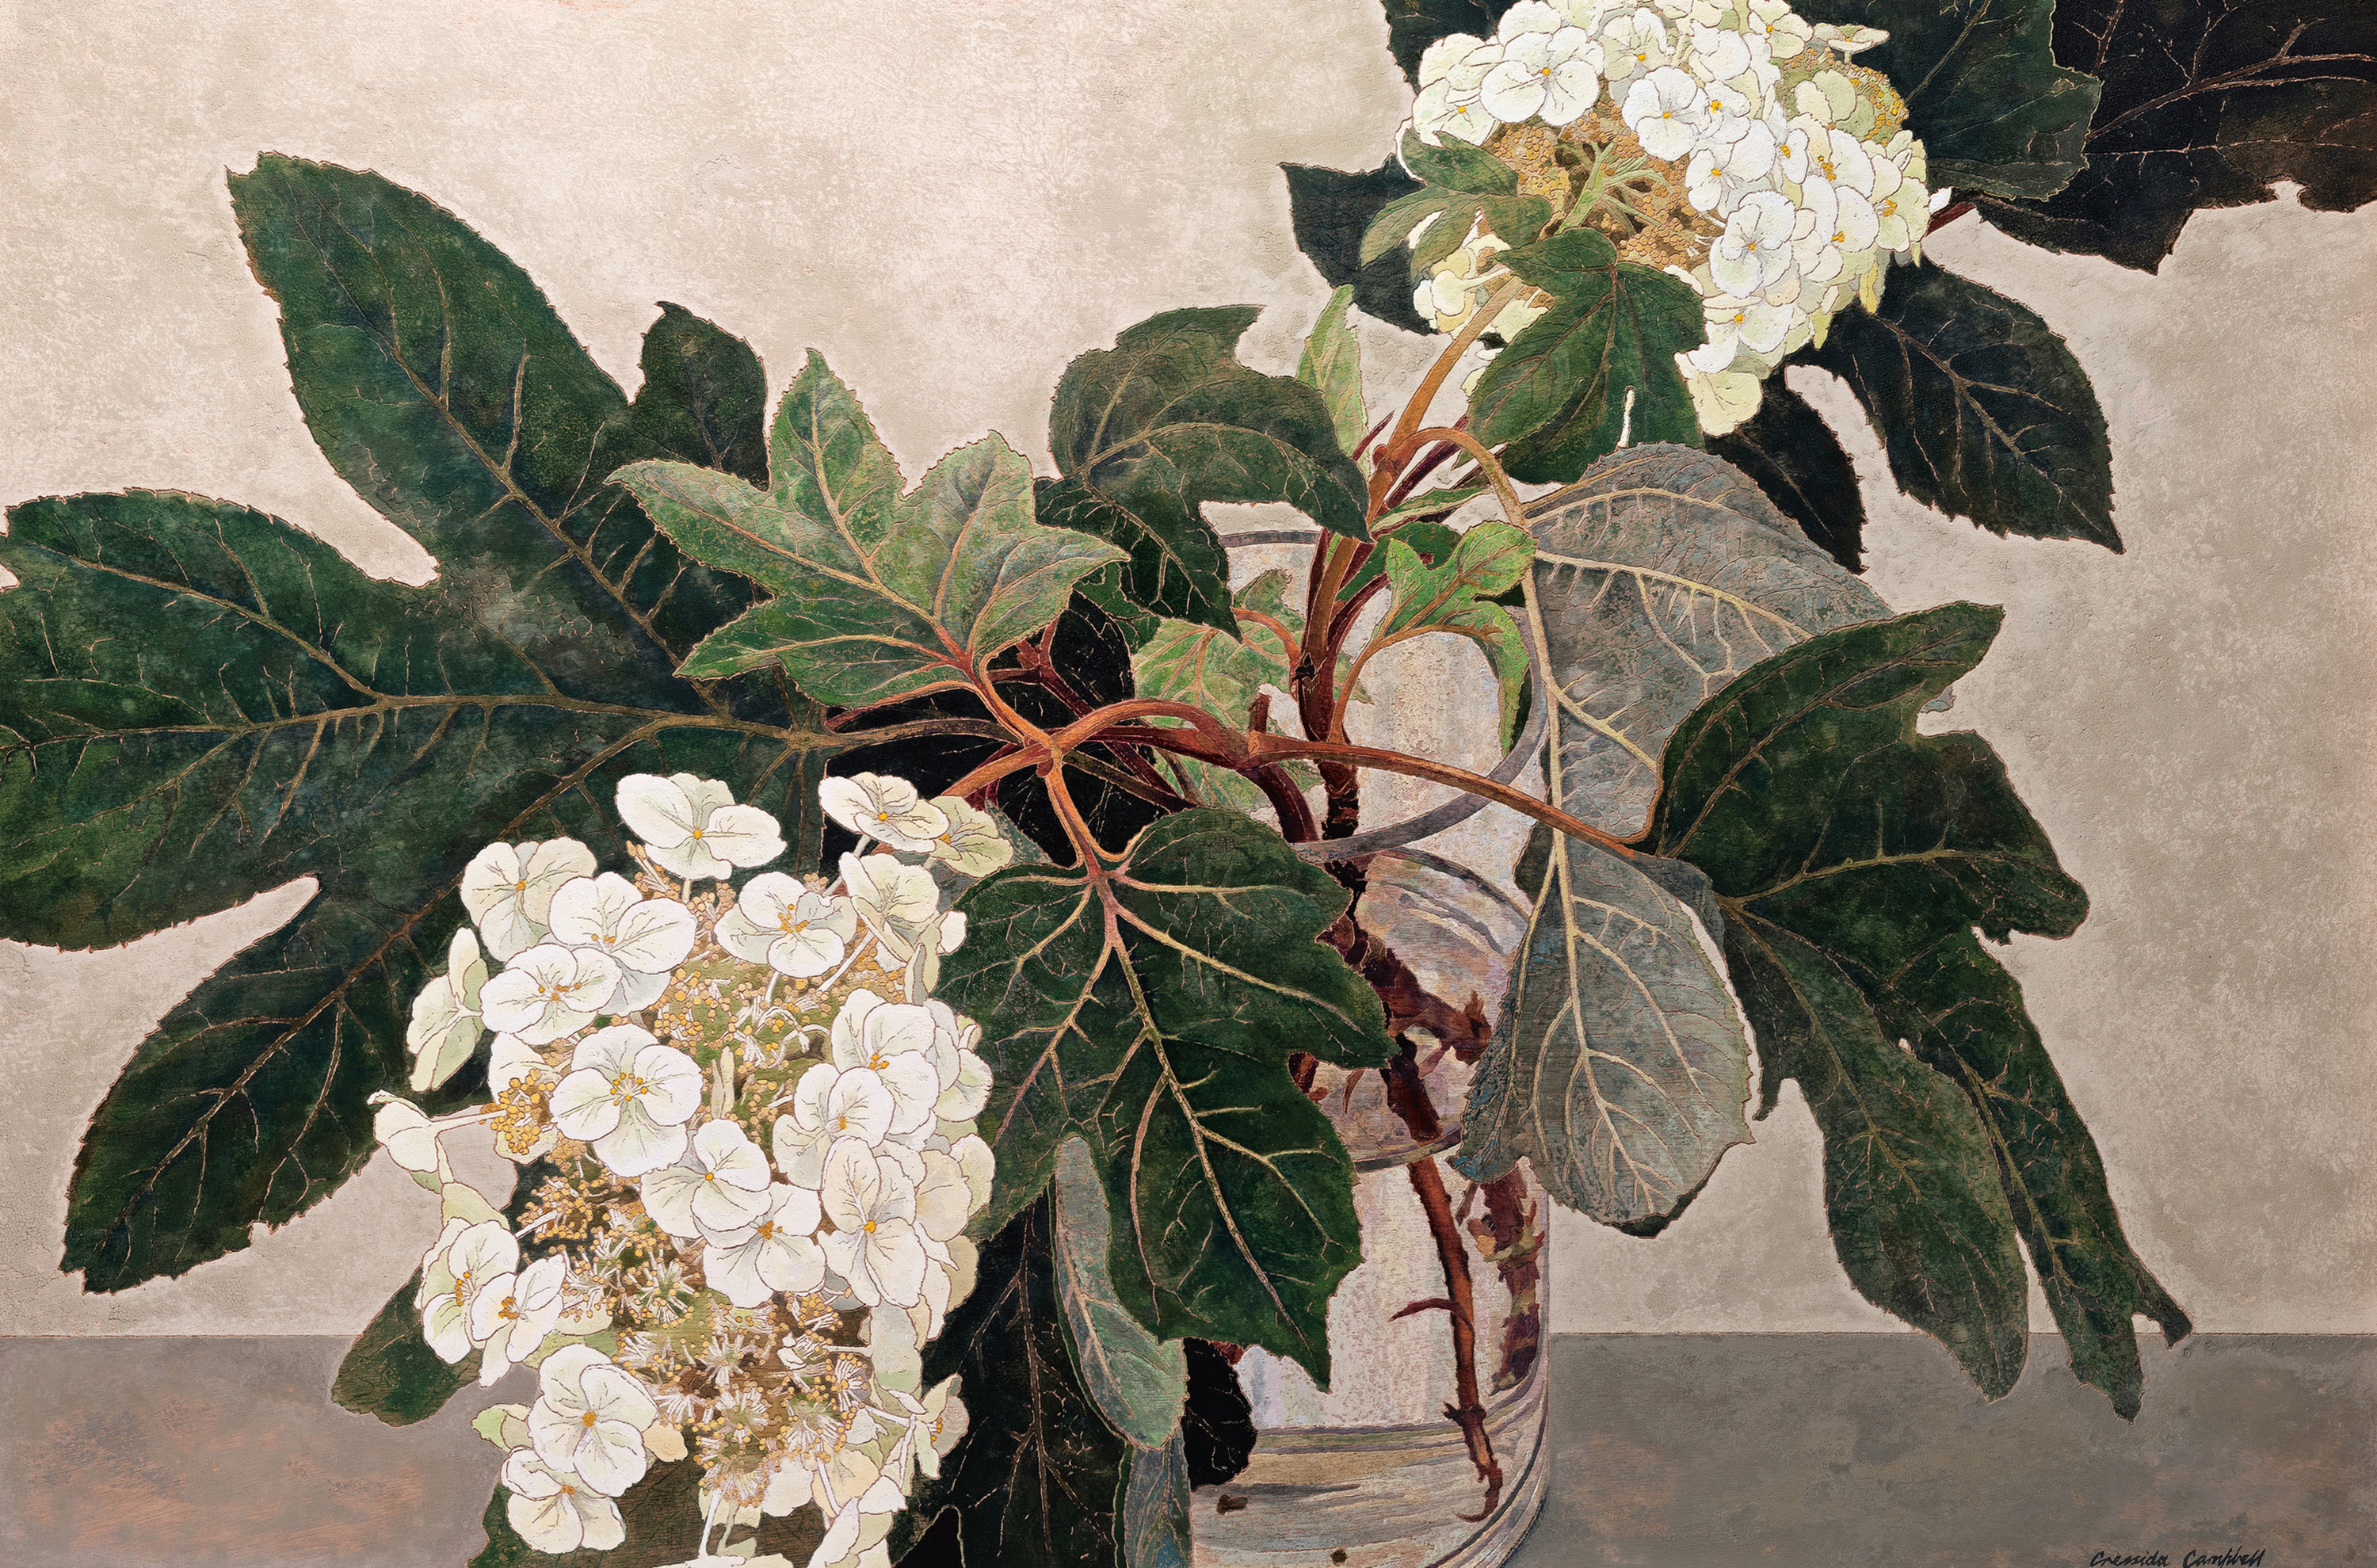 A painting of Japanese hydrangeas, a small white flower growing in clusters on a vine, in a pot of water